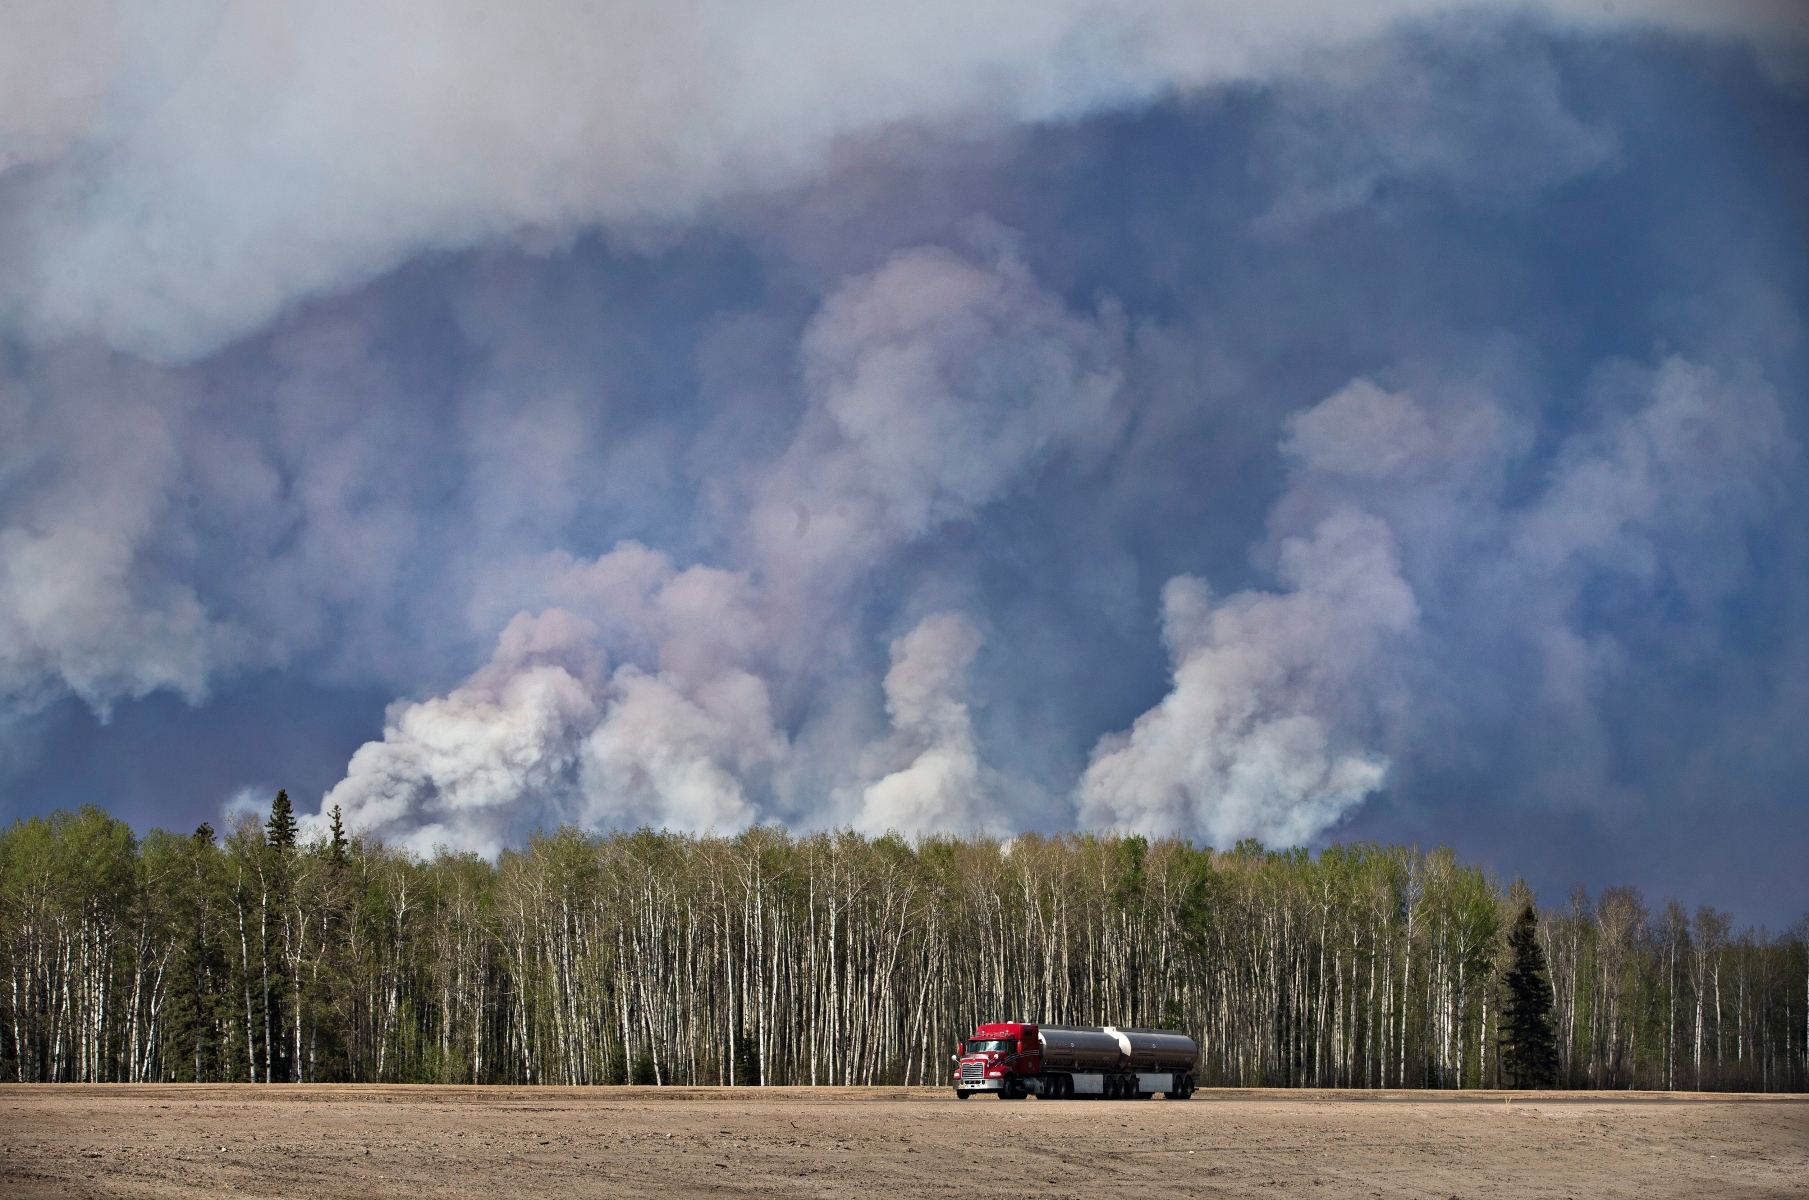 A semi truck drives away from a wildfire in Fort McMurray, Canada, Thursday, May 5, 2016. The massive wildfire raging in the Canadian province of Alberta grew to 85,000 hectares (210,035 acres) and officials said Thursday they would like to move south about 25,000 evacuees who had previously fled north, including 8,000 by air. (Jason Franson/The Canadian Press via AP) MANDATORY CREDIT Canada Wildfire